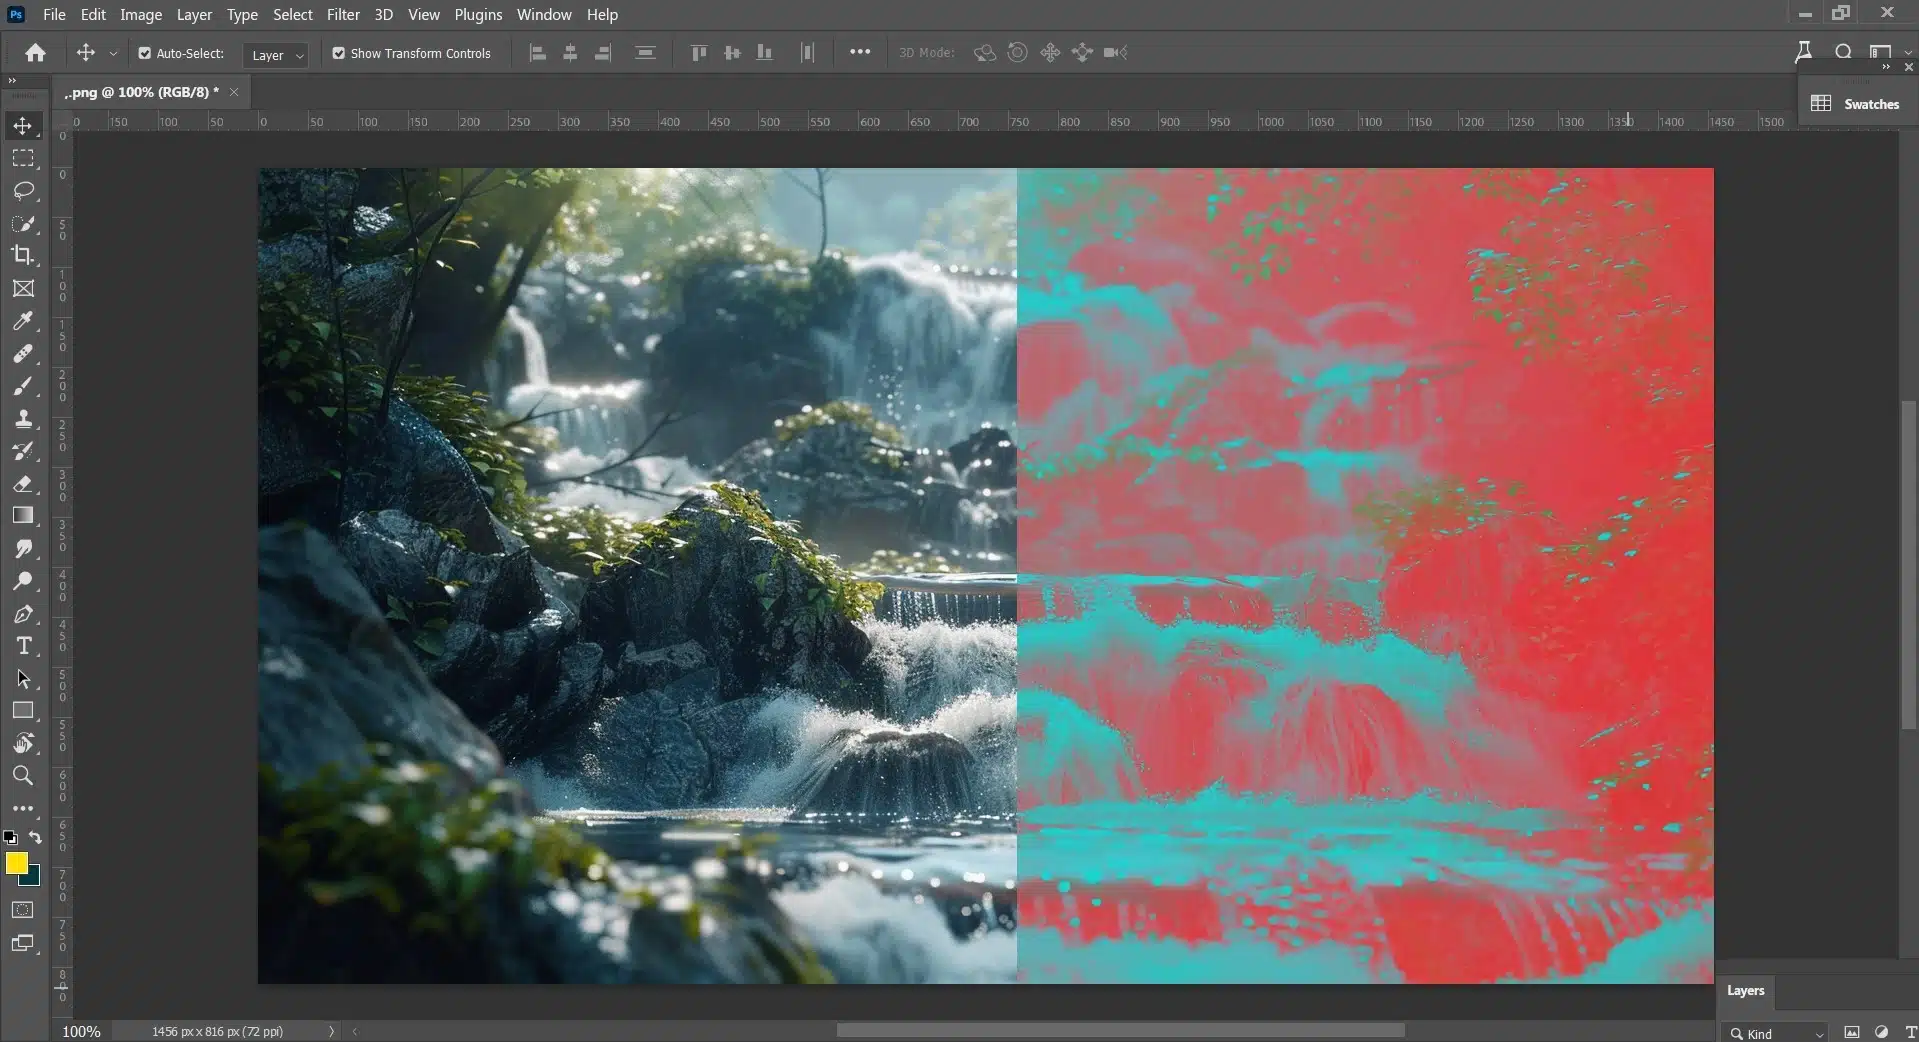 A Photoshop interface showing a split view of a waterfall scene, with one side in natural colors and the other in vibrant, inverted colors highlighting reds and cyans.